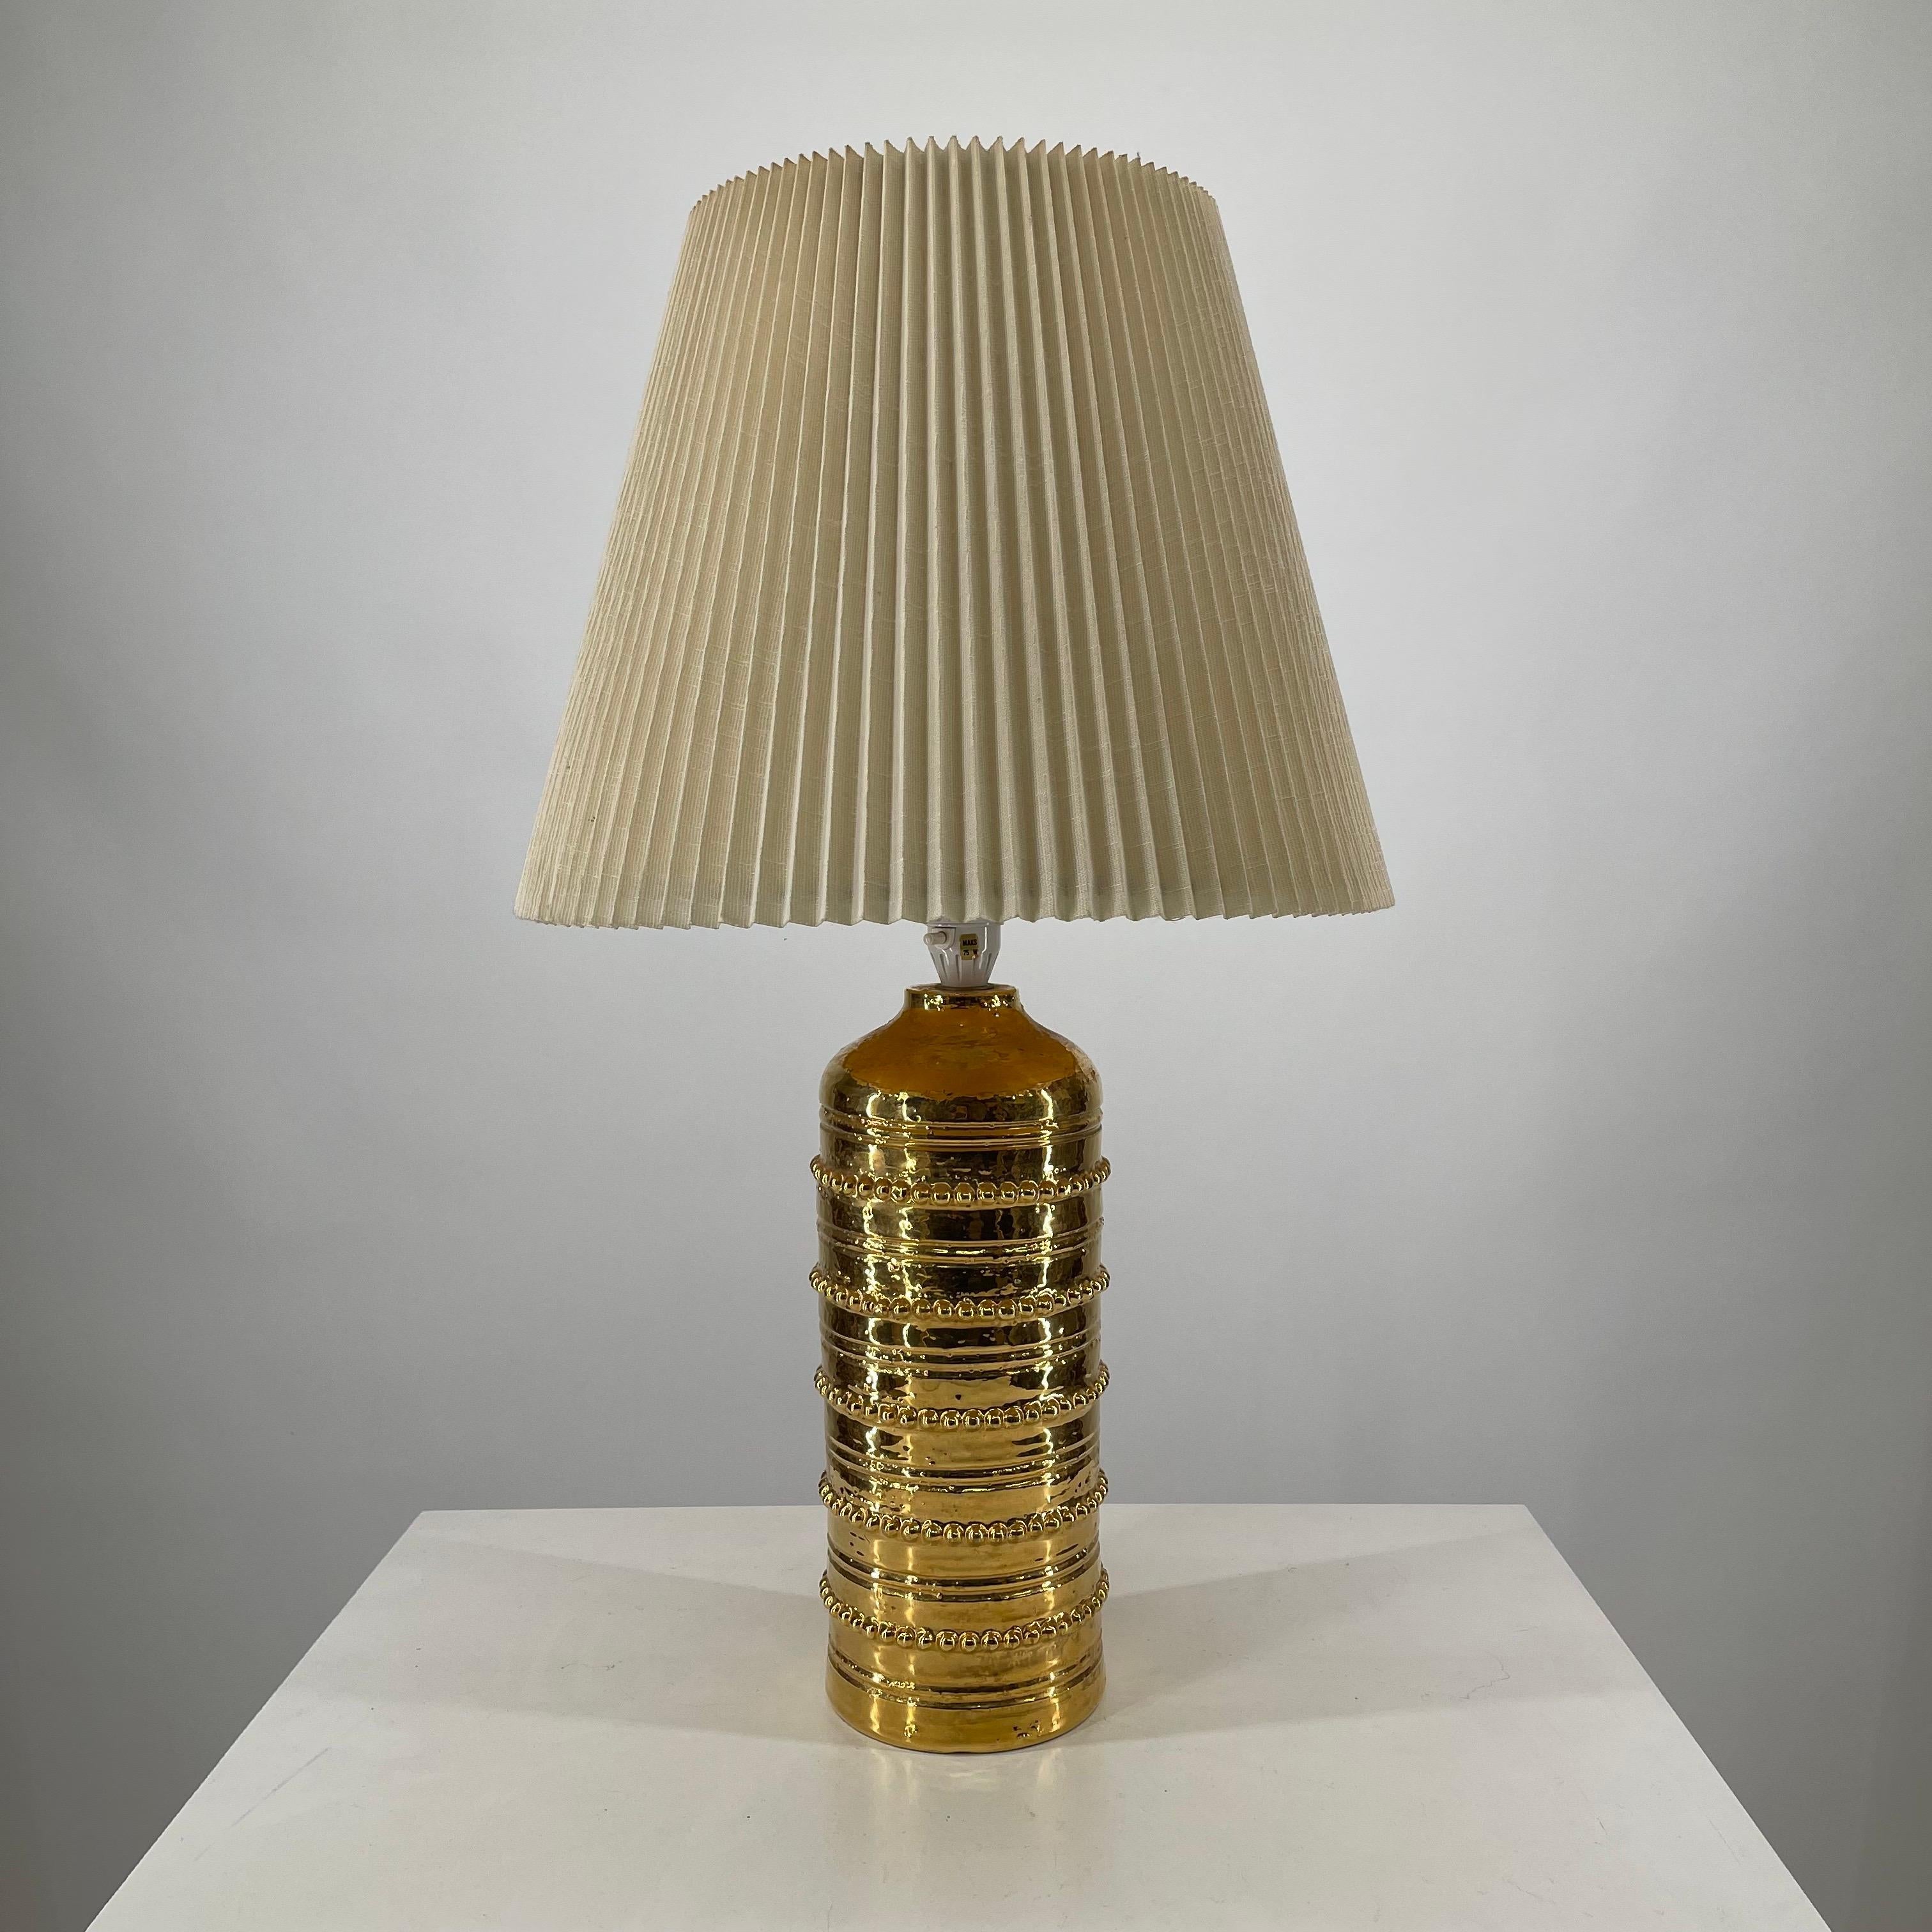 Bitossi Gold glazed ceramic table lamp by Falkenbergs Belysning of Sweden, 1965. Comes with original shade.